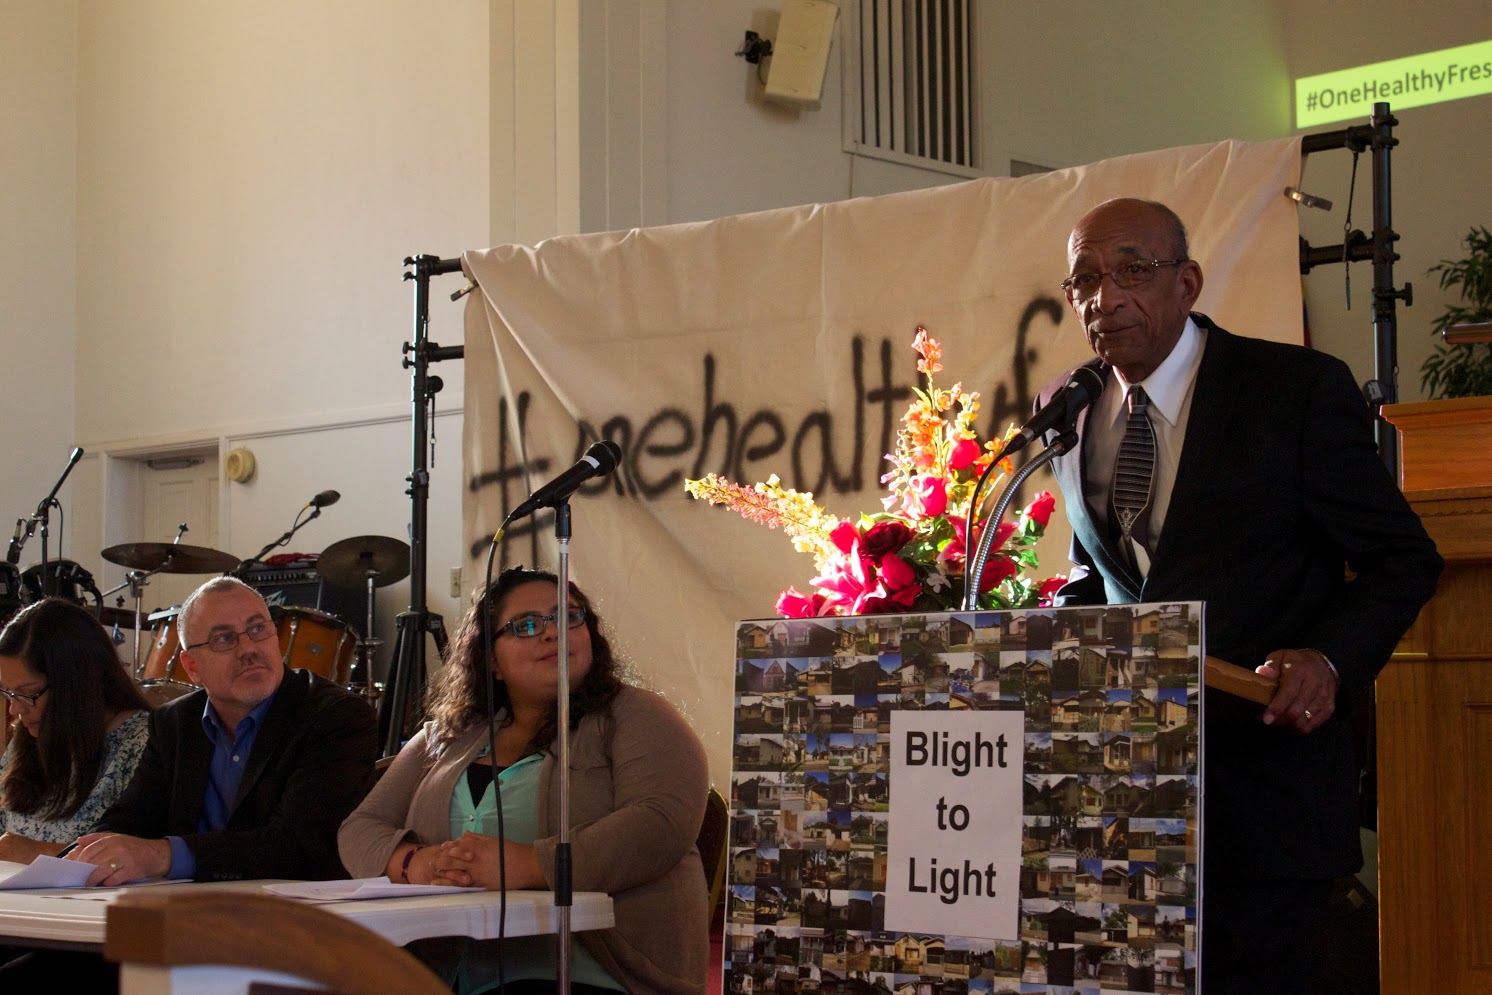 Pastor Richard Daniels addresses the crowd at last night's Blight to Light meeting. All pictures by Colby Tippett